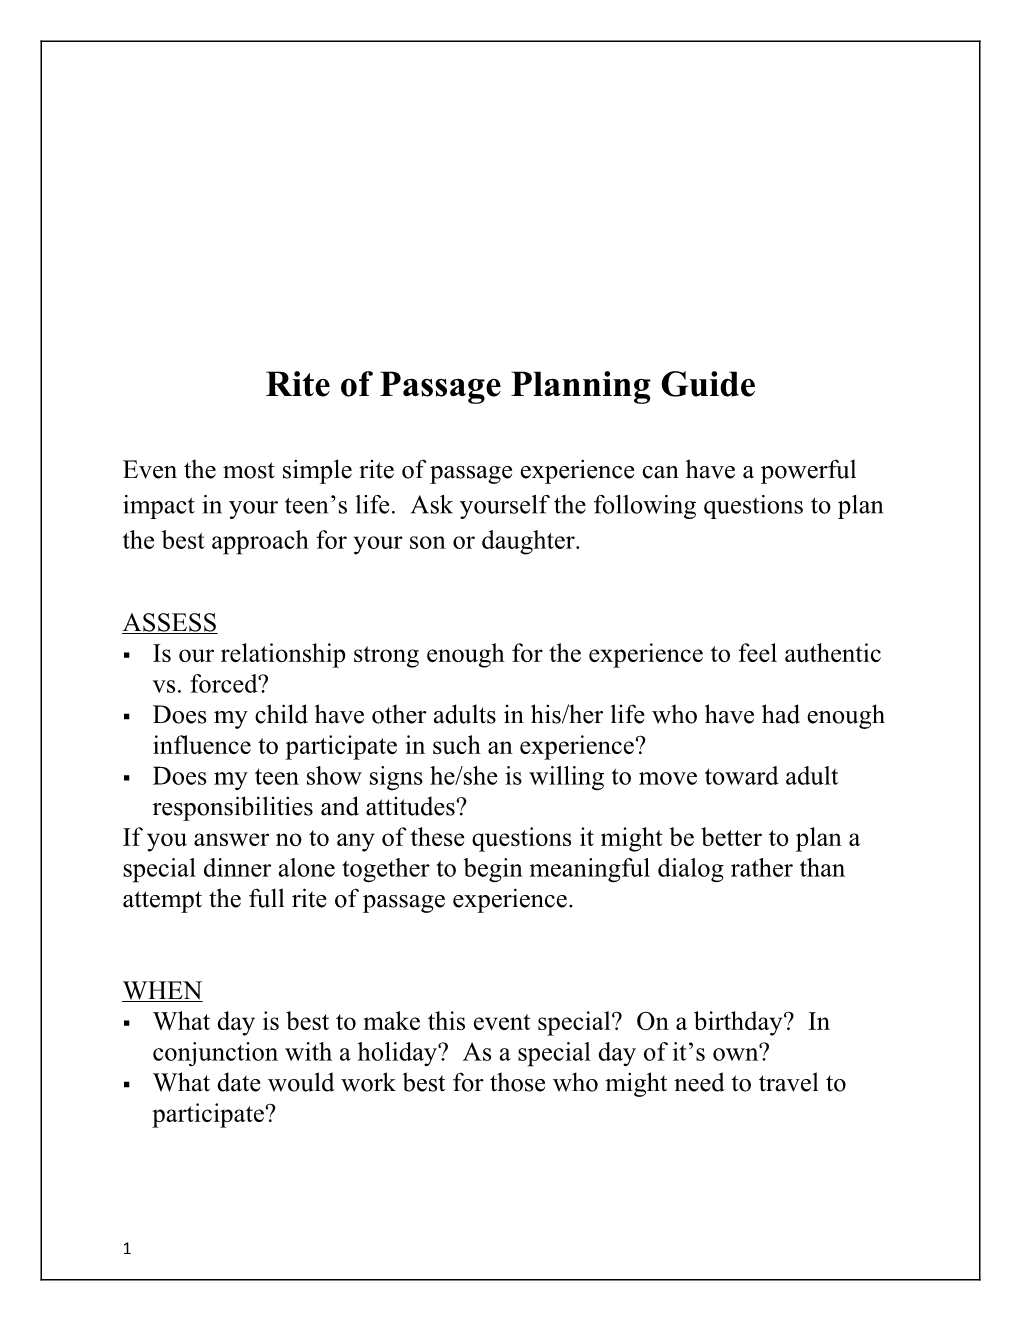 Rite of Passage Planning Guide